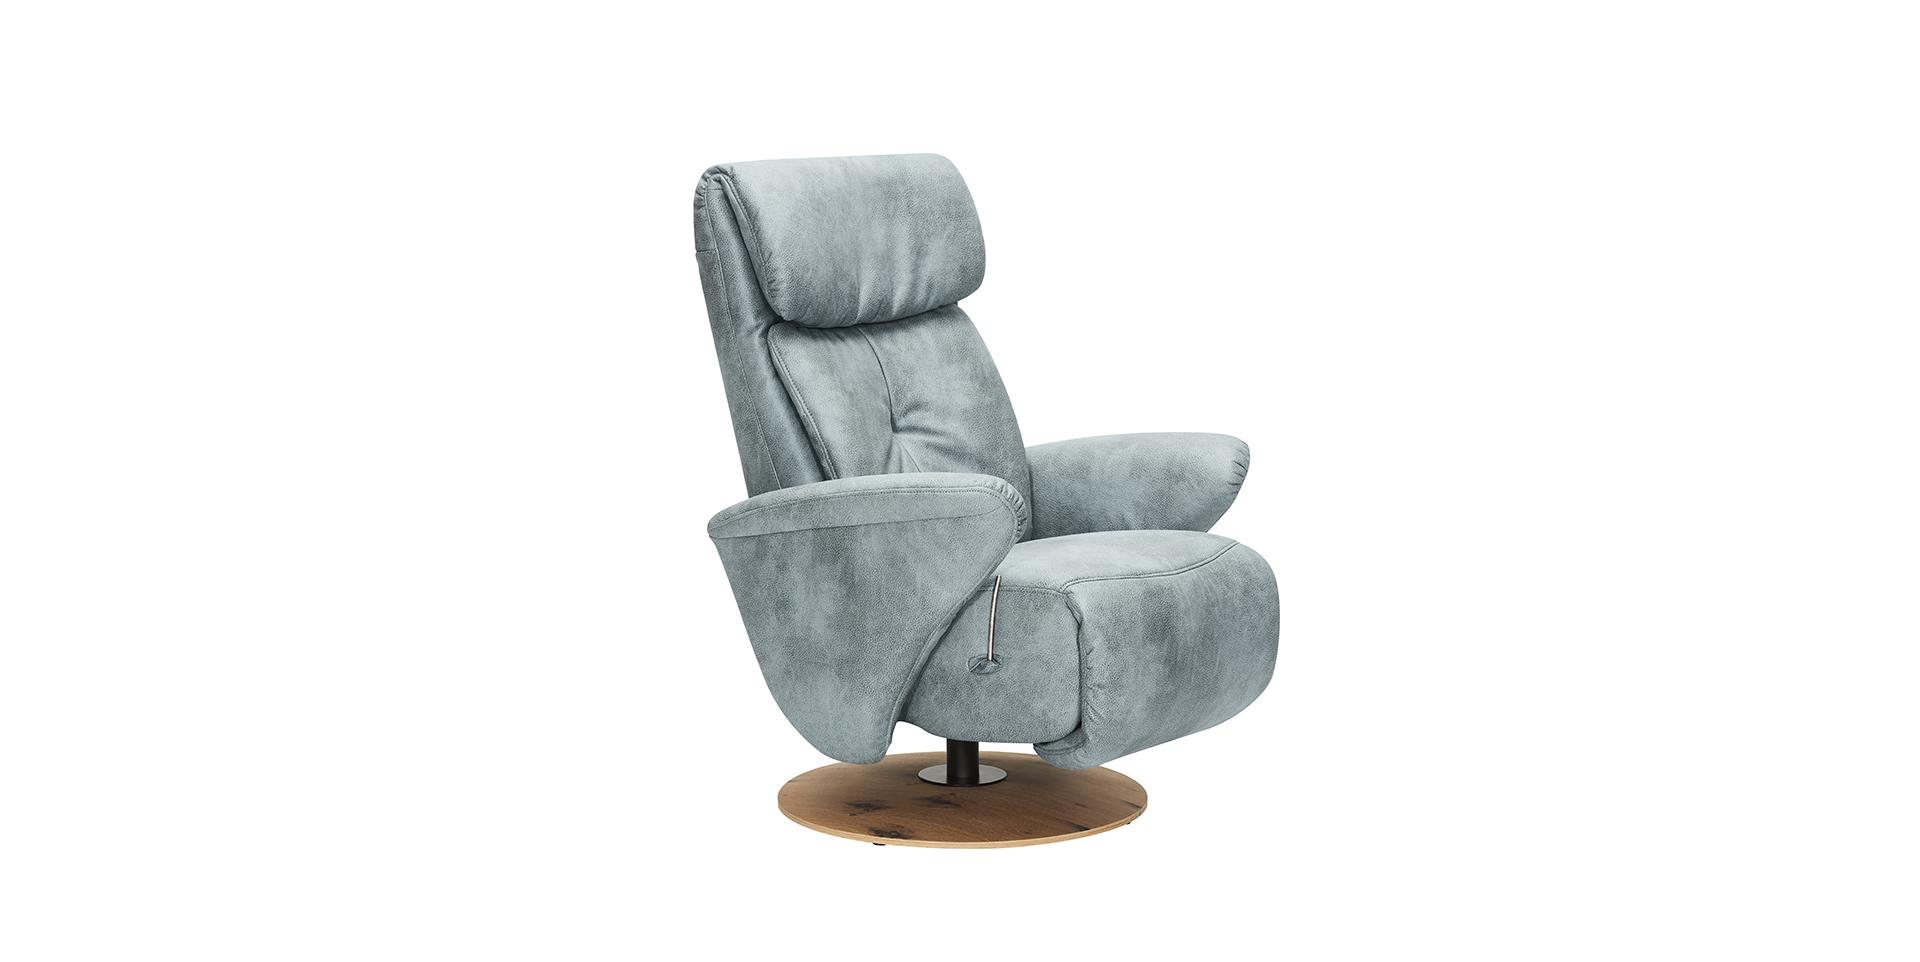 Slider Fauteuil relaxation 7341 (image 4)